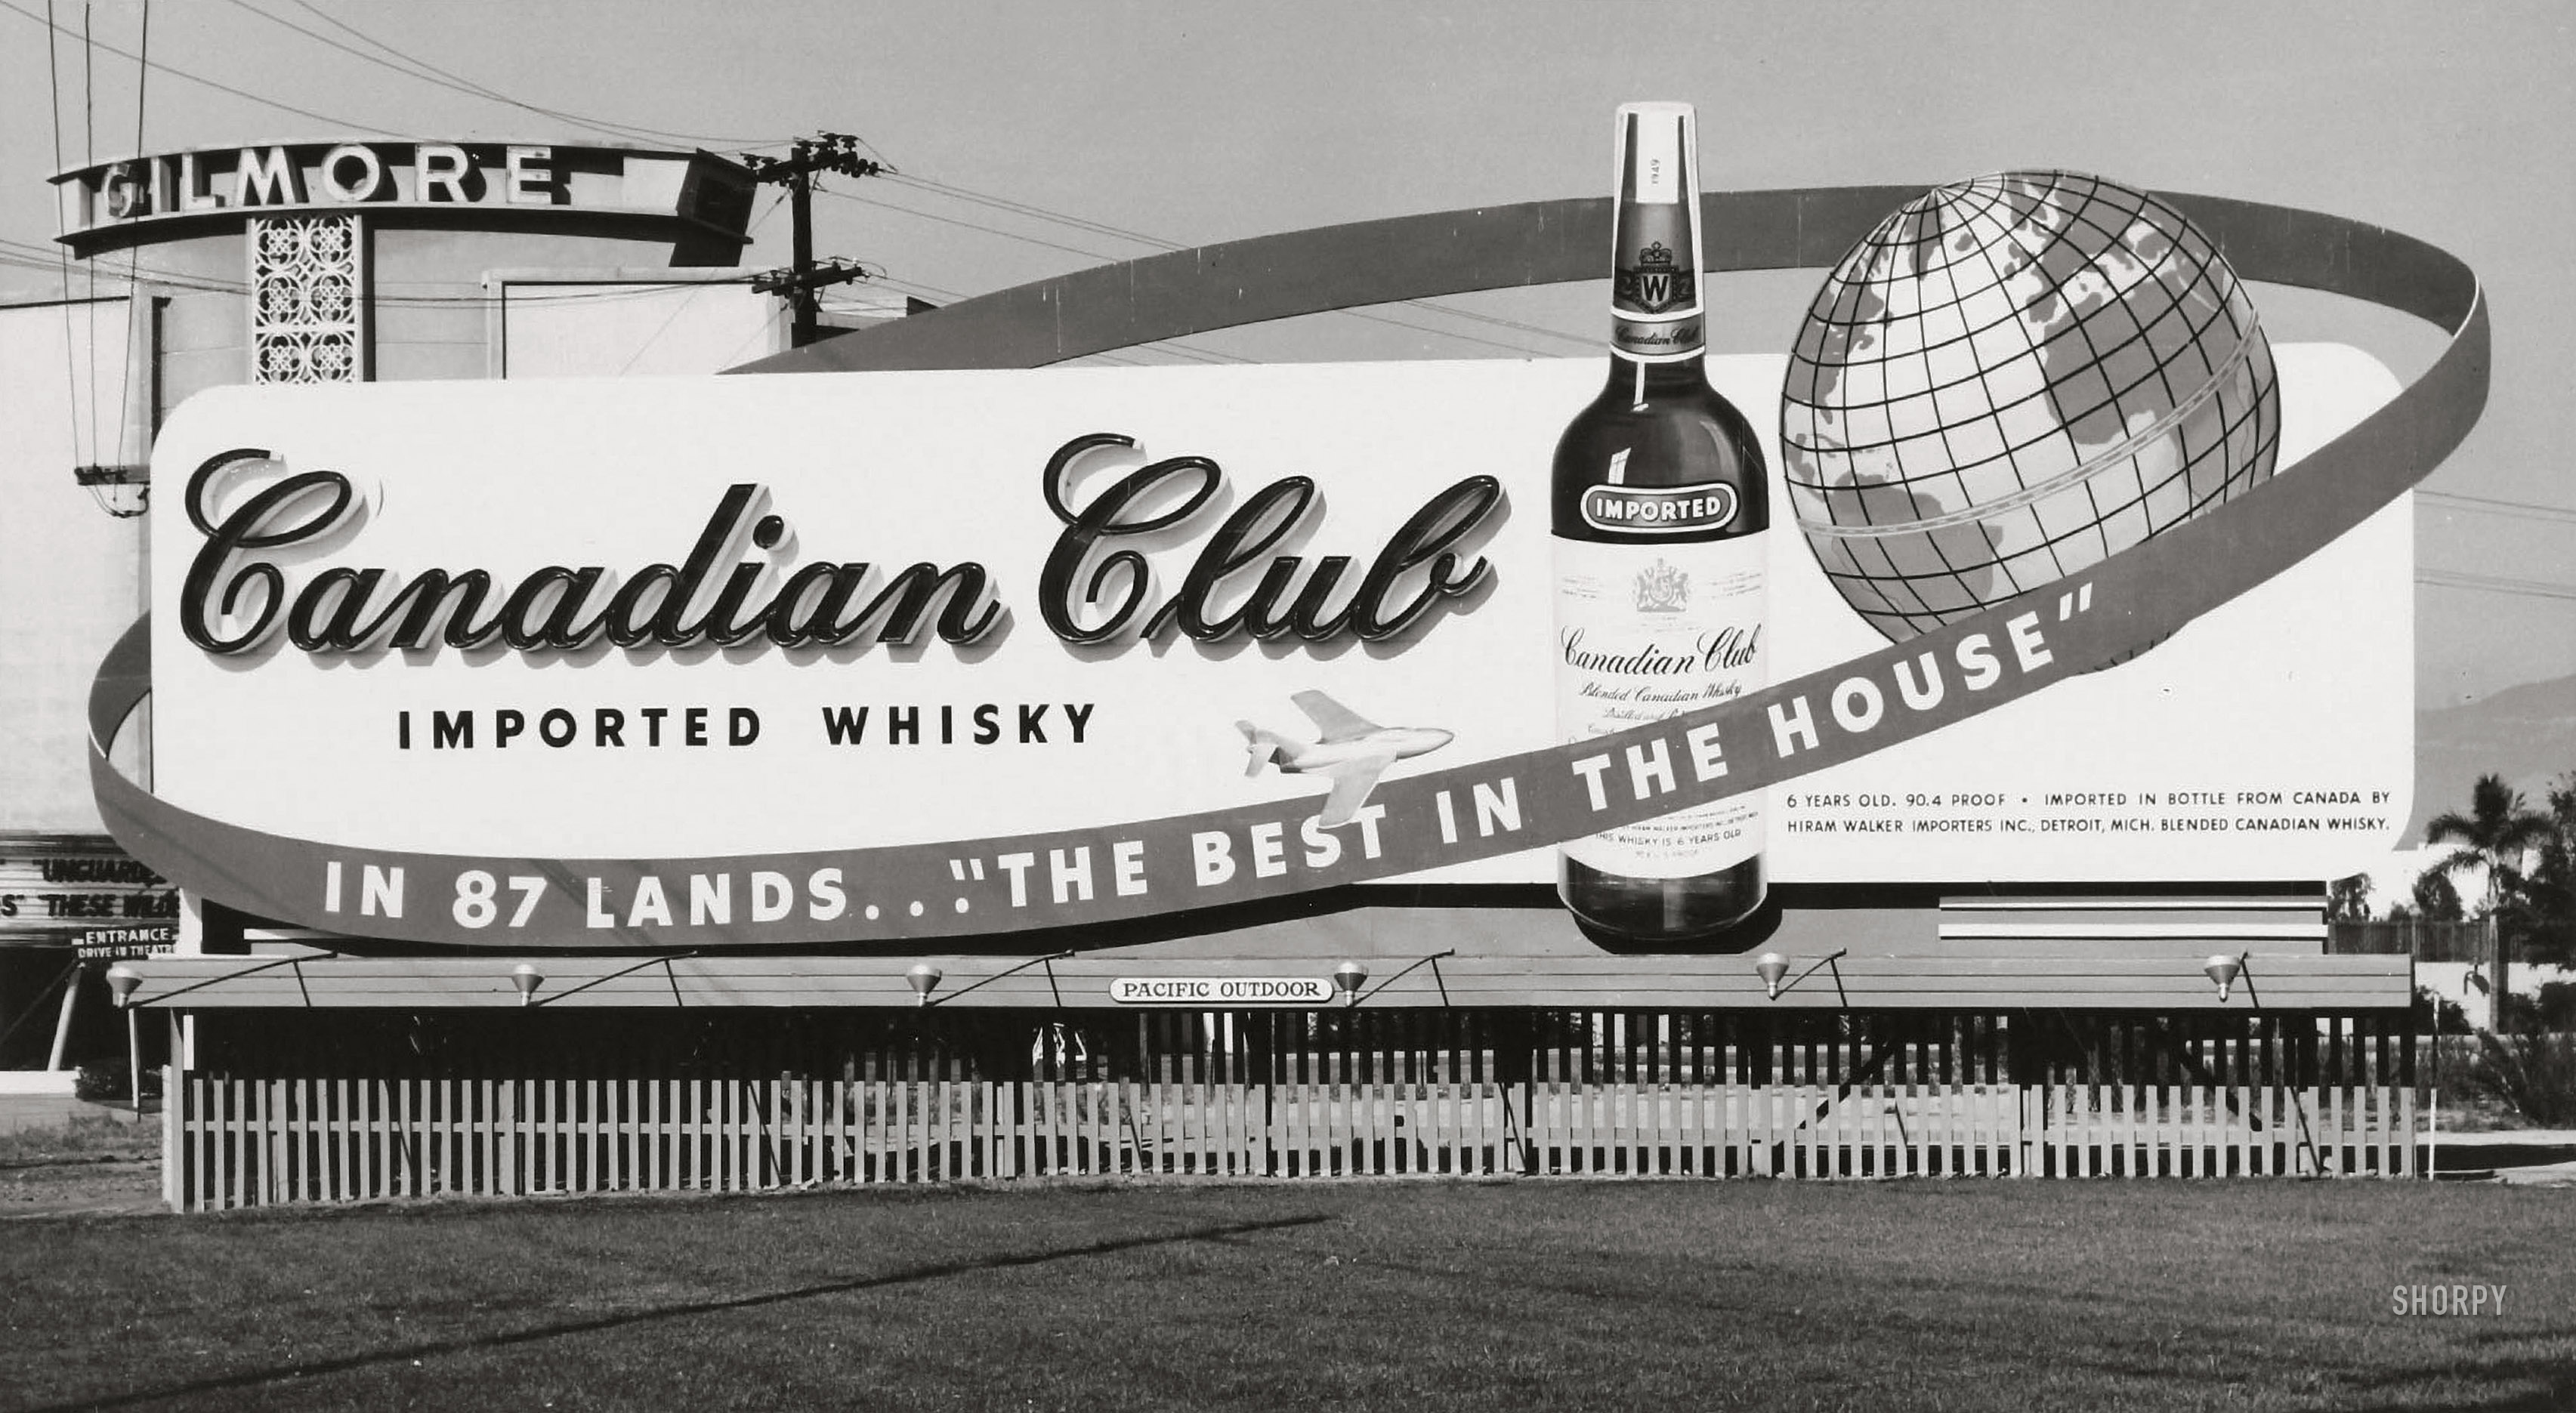 Los Angeles circa 1956. "Canadian Club imported whisky -- In 87 lands, the best in the house." No. 4 in a series of billboard photos from the files of Pacific Outdoor Advertising.  View full size.